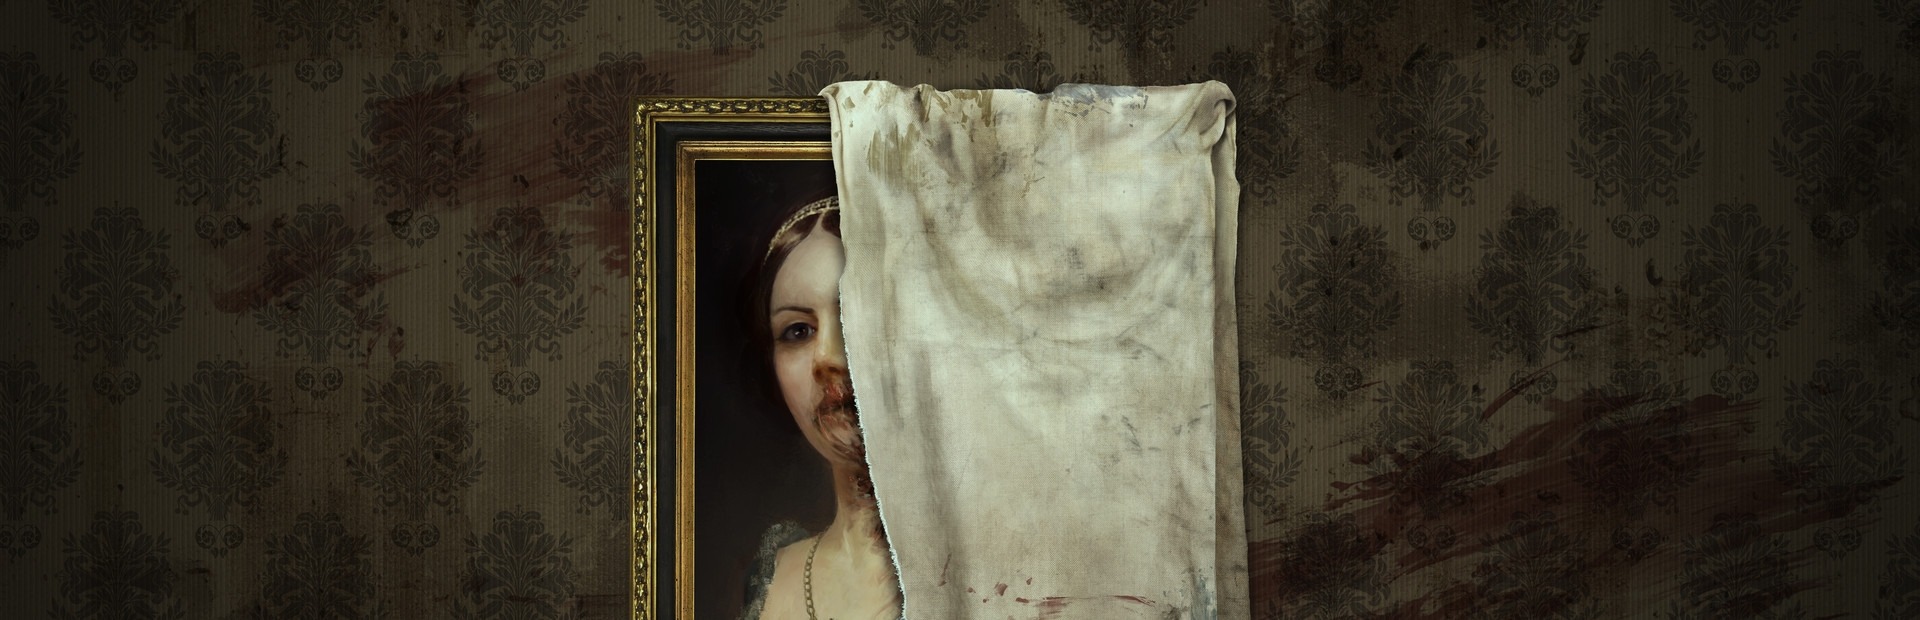 Layers of Fear Masterpiece Edition Collector's PC DVD - Polish / English +  STEAM